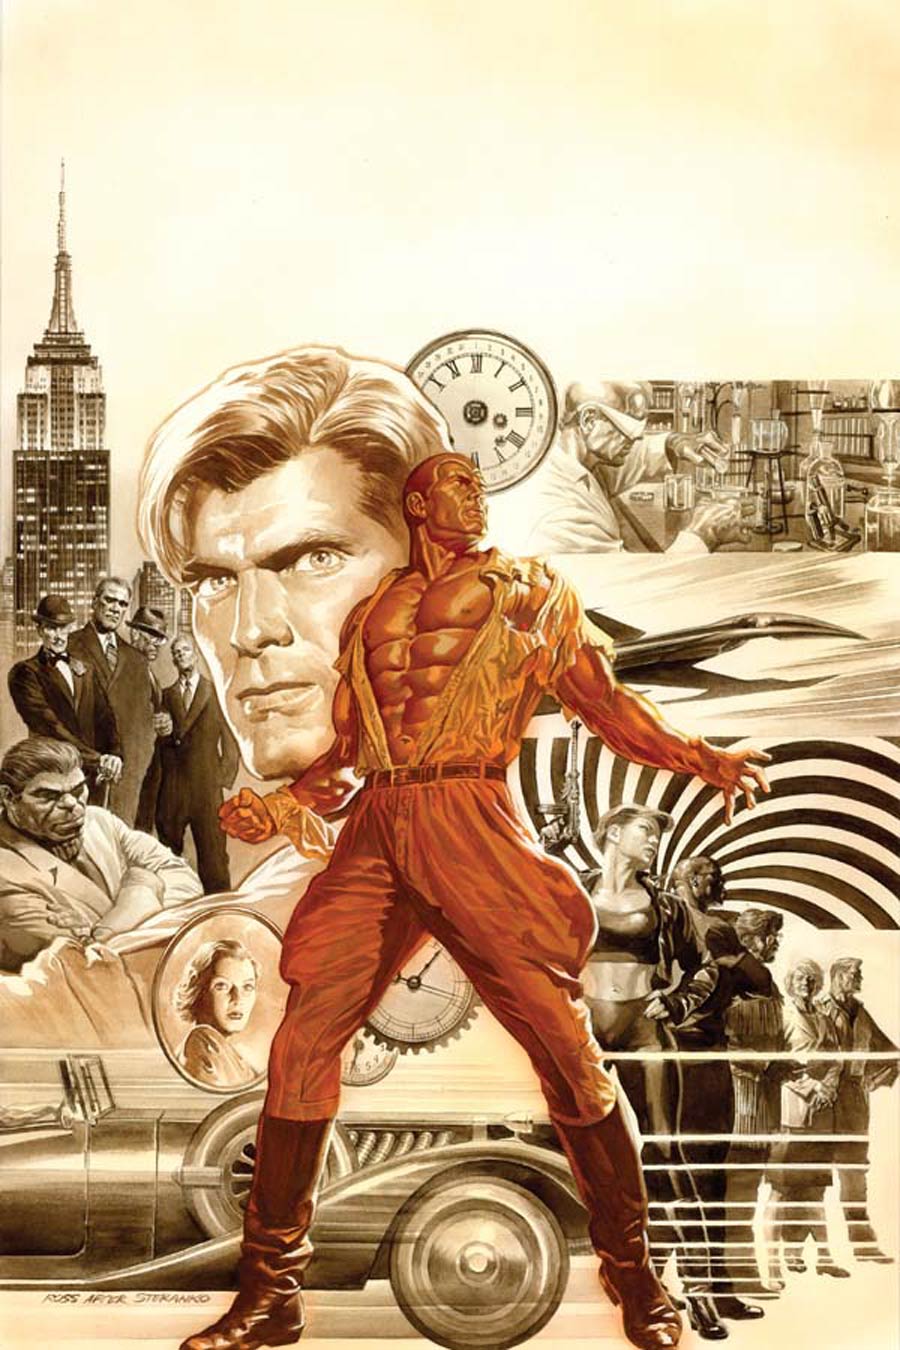 Doc Savage Vol 5 #1 Cover E High-End Alex Ross Virgin Art Ultra-Limited Cover (ONLY 50 COPIES IN EXISTENCE!)